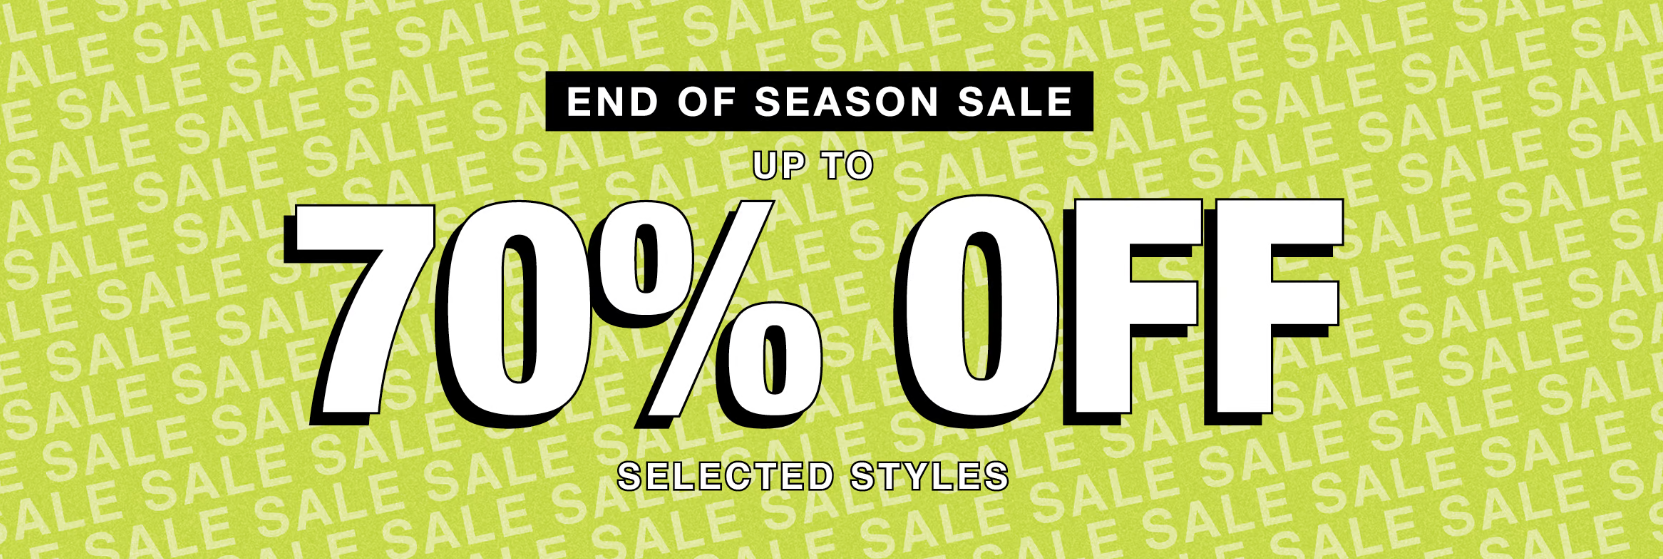 Up to 70% OFF on selected styles at EOSS sale from EXIE